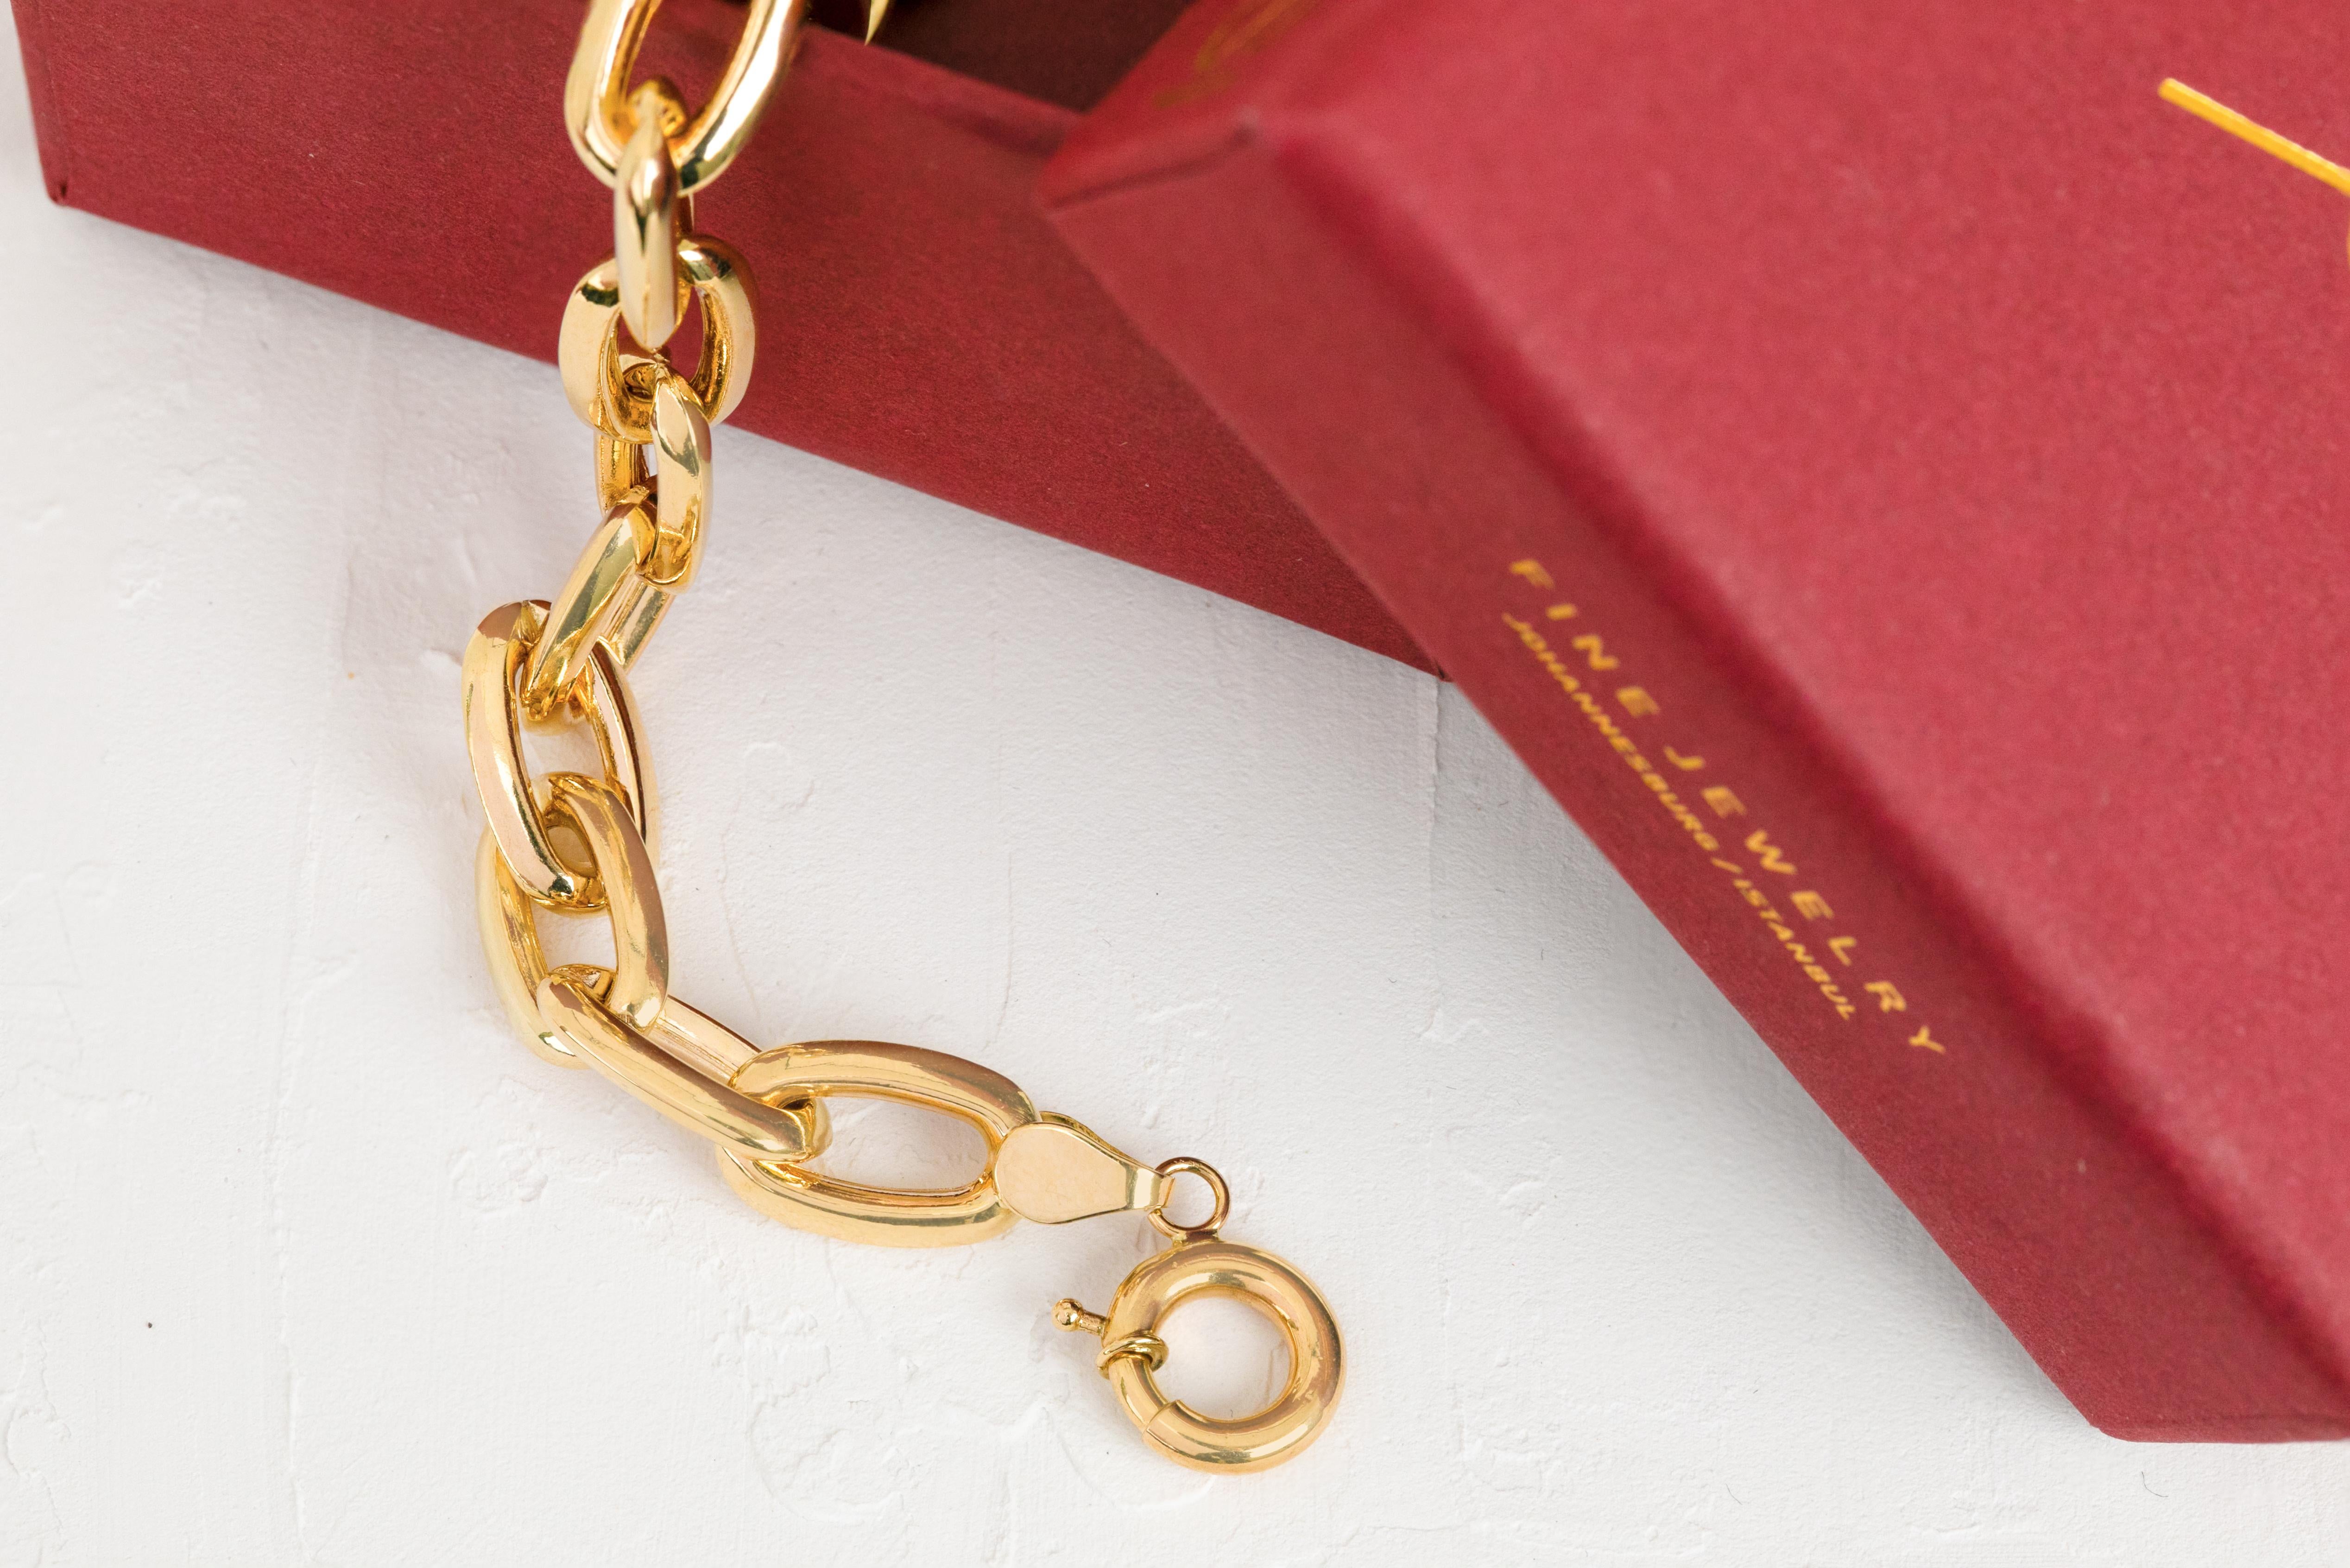 14K Gold Bracelet Ring Paper Clip Chain Model Bracelet

Solid gold.
With hallmark.

Total Weight: 9,72 gr.
Size: 19.50 cm

This piece was made with quality materials and excellent handwork. I guarantee the quality assurance of my handwork and